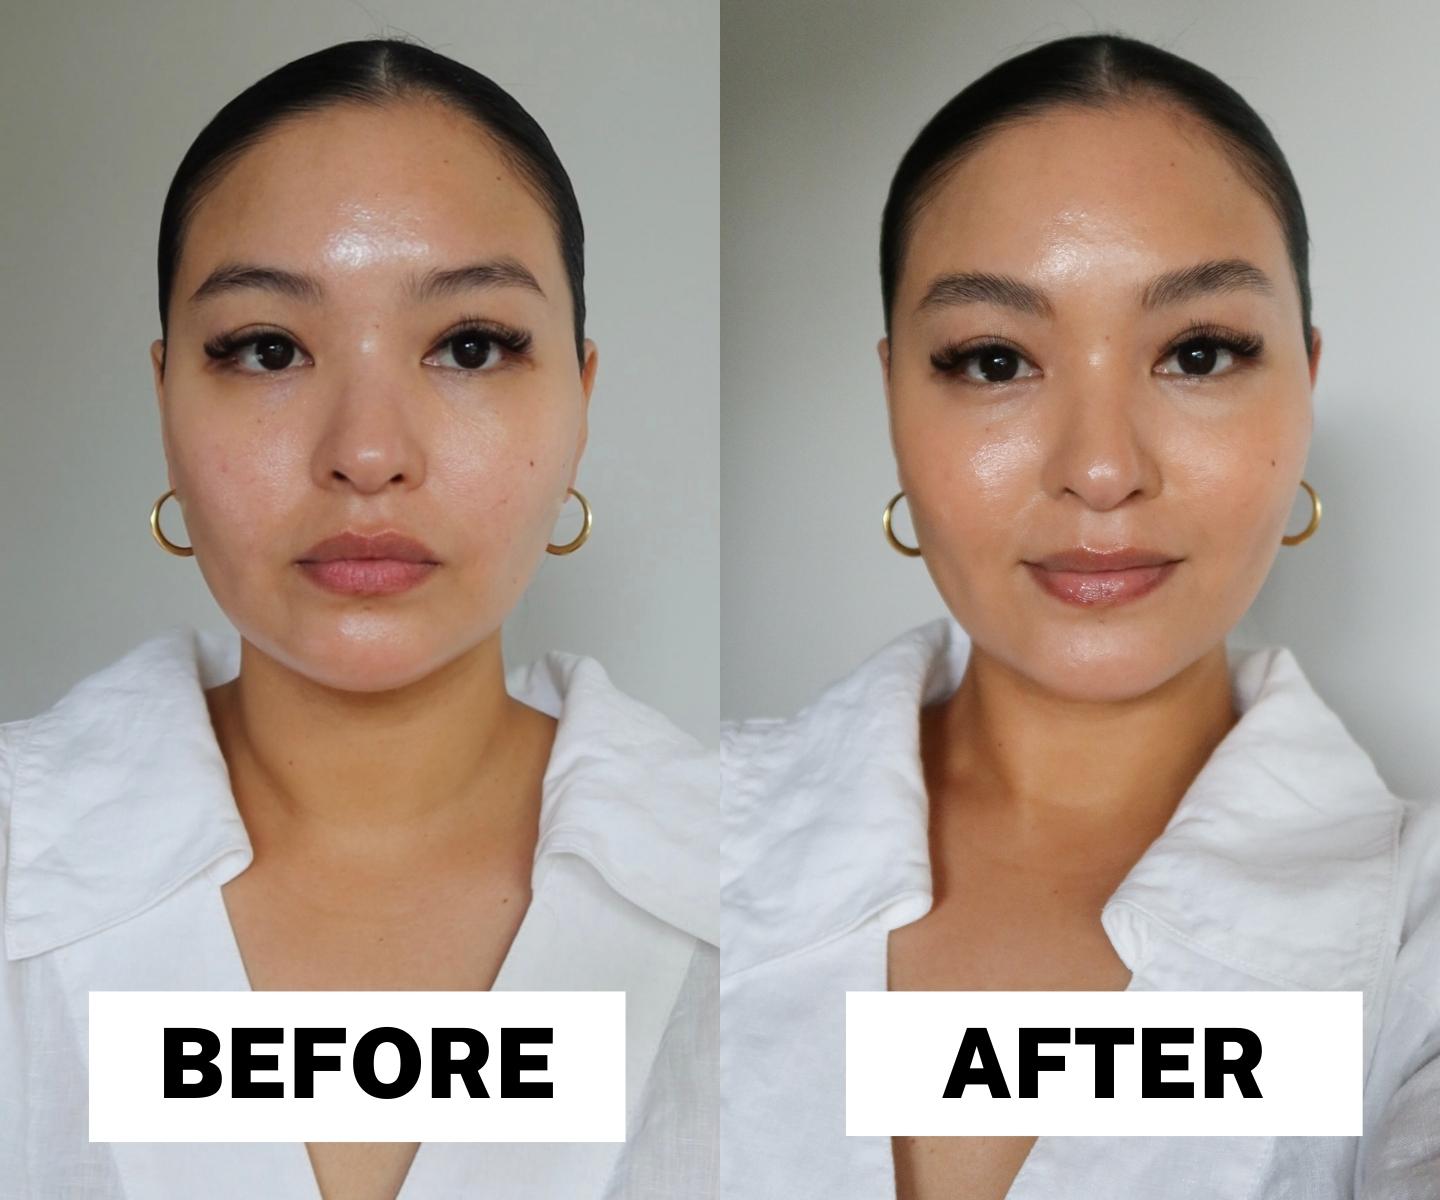 Dot Single Layer Makeup Trend Amelia before and after